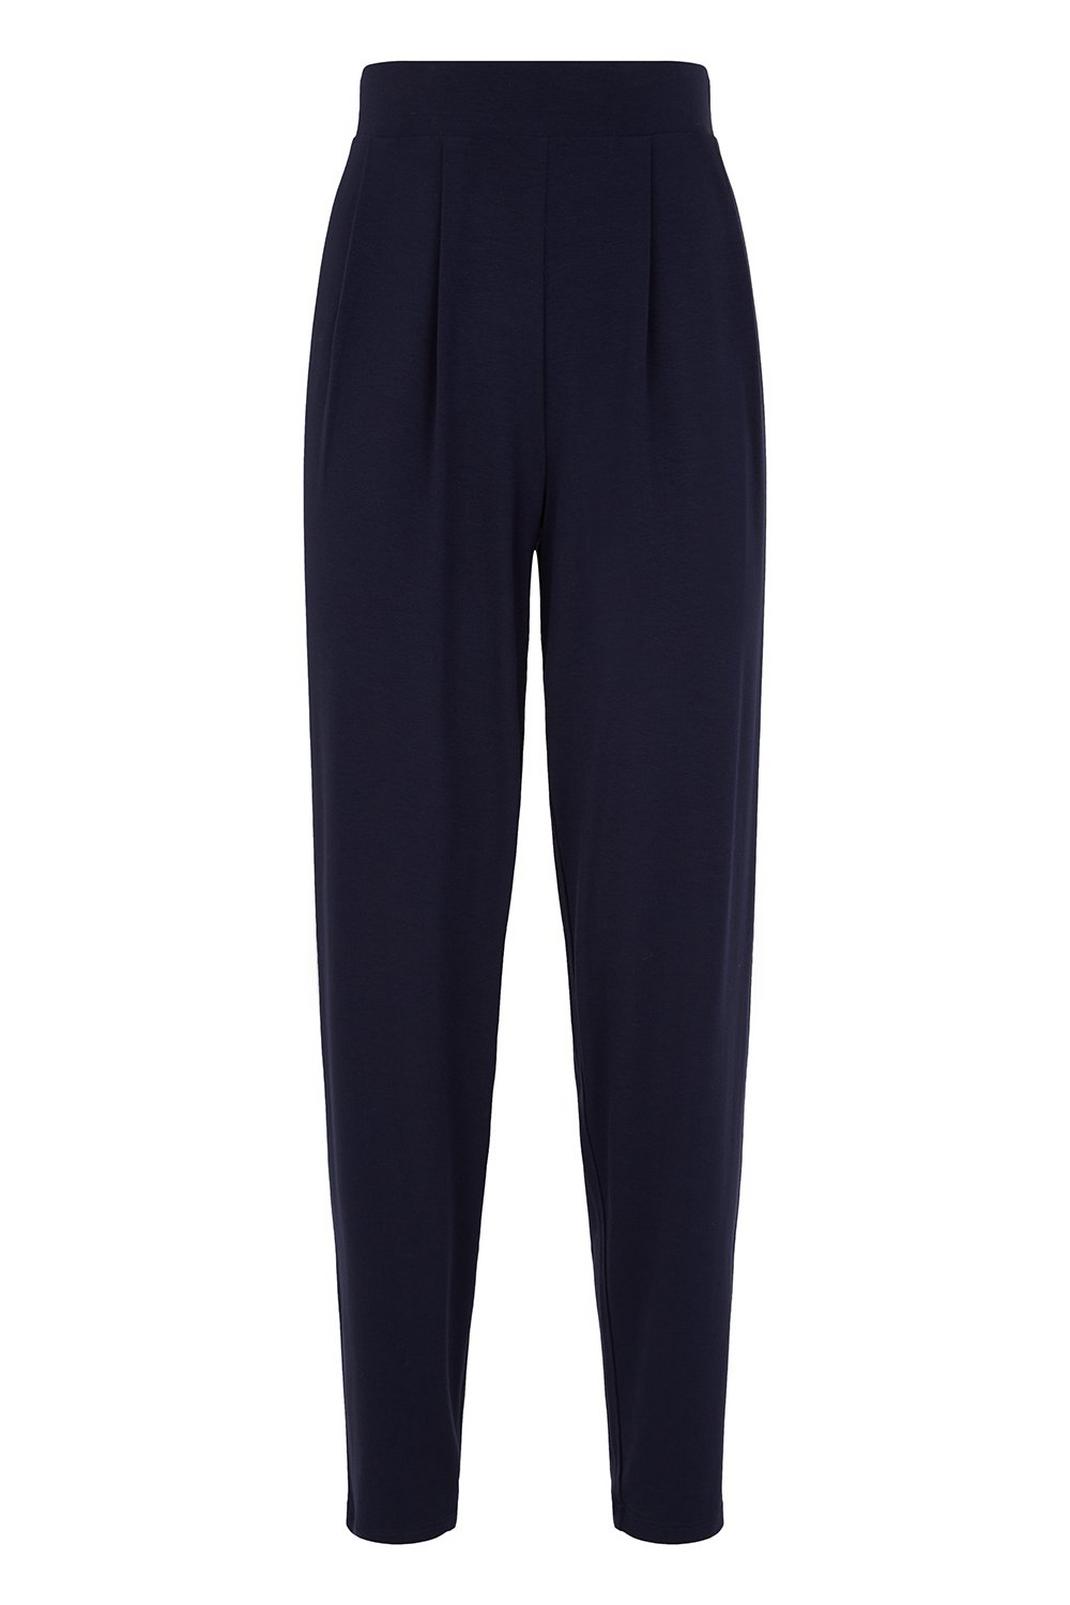 148 TALL Navy Tapered Trousers image number 2